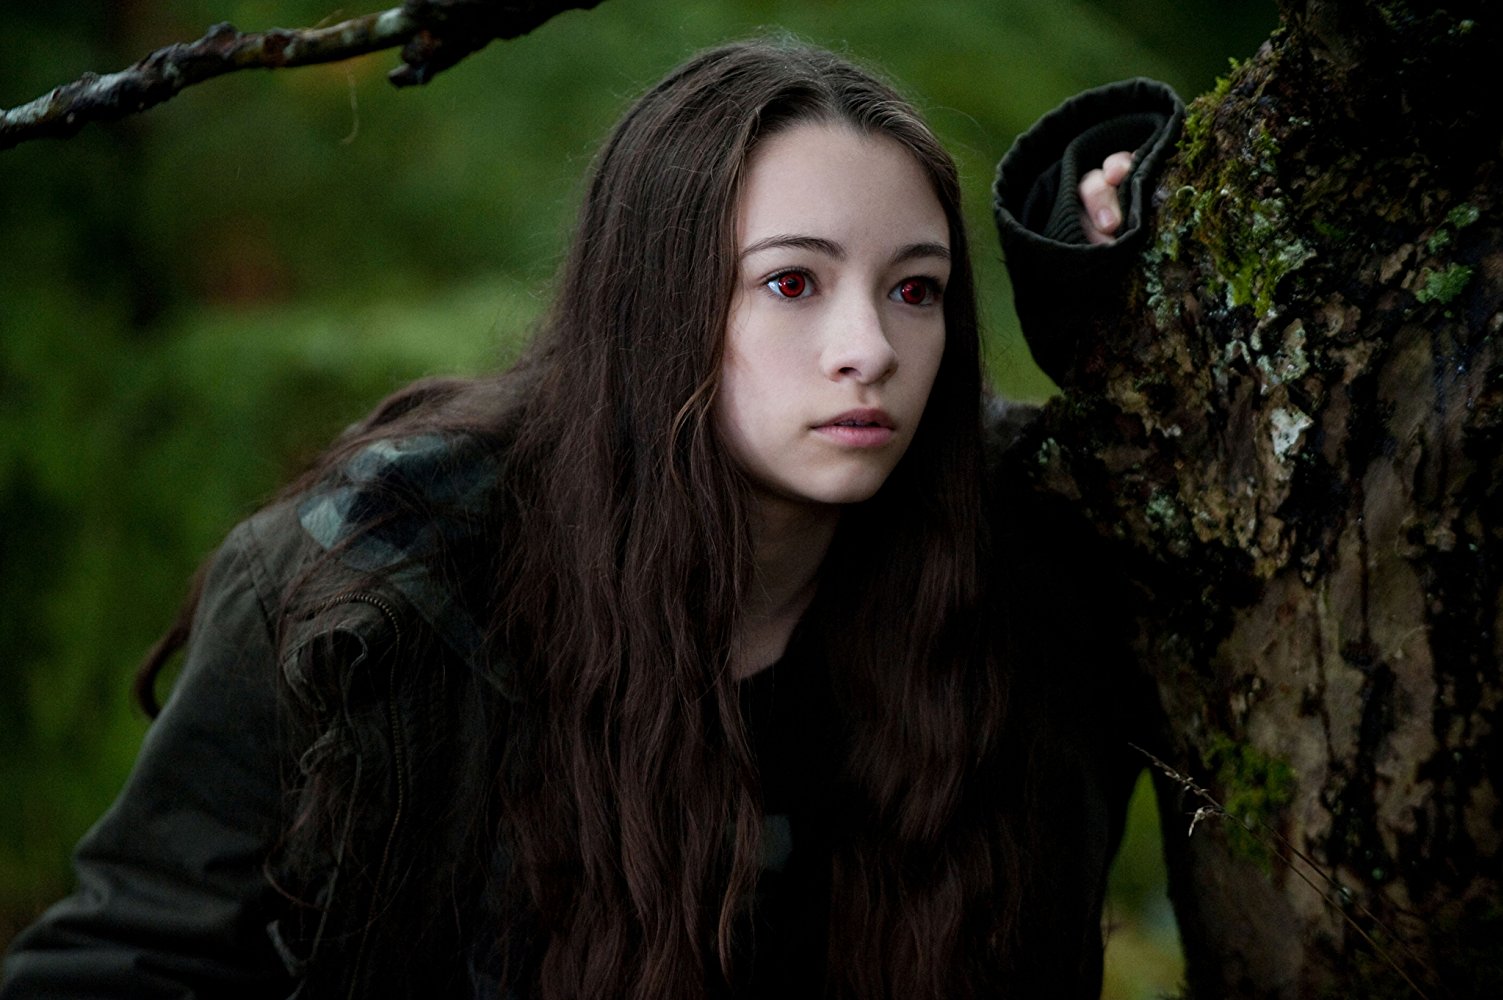 Bree Tanner (Twilight character)